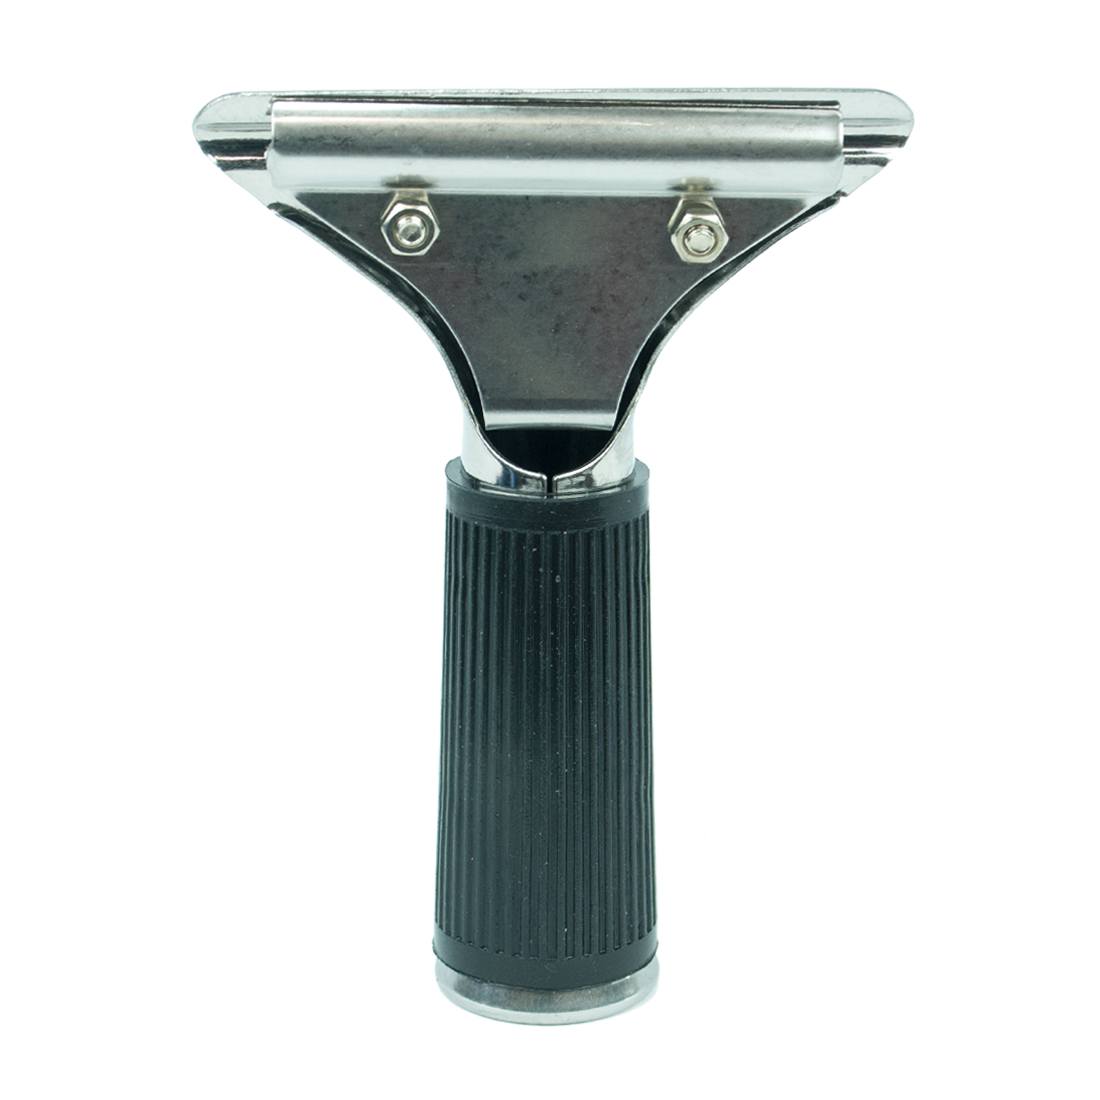 Pulex Stainless Steel Squeegee Handle with Rubber Grip - Back View